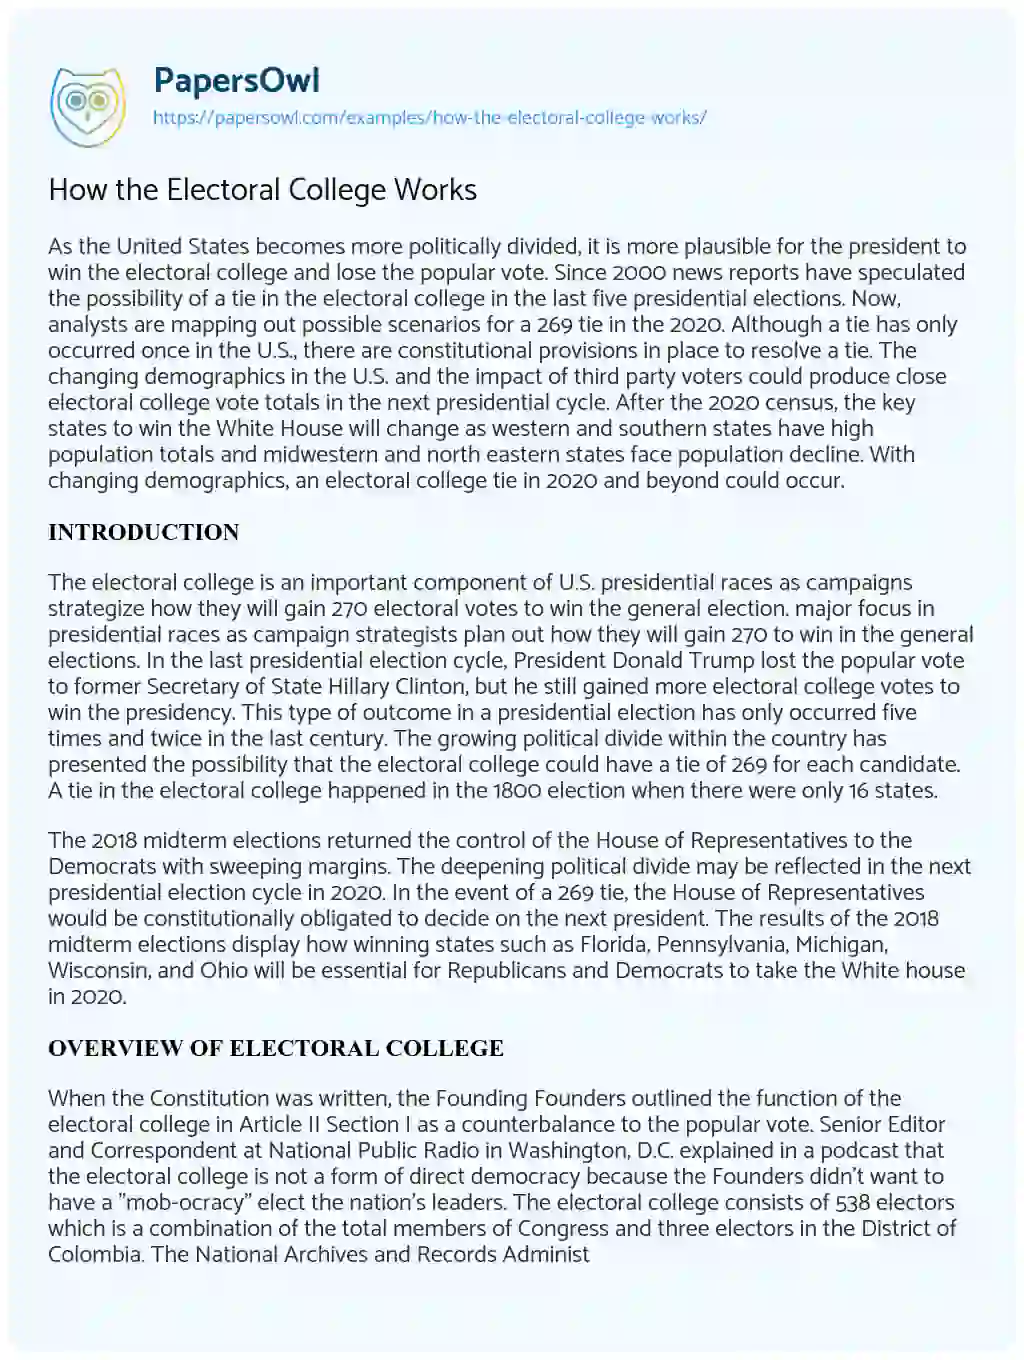 Essay on How the Electoral College Works